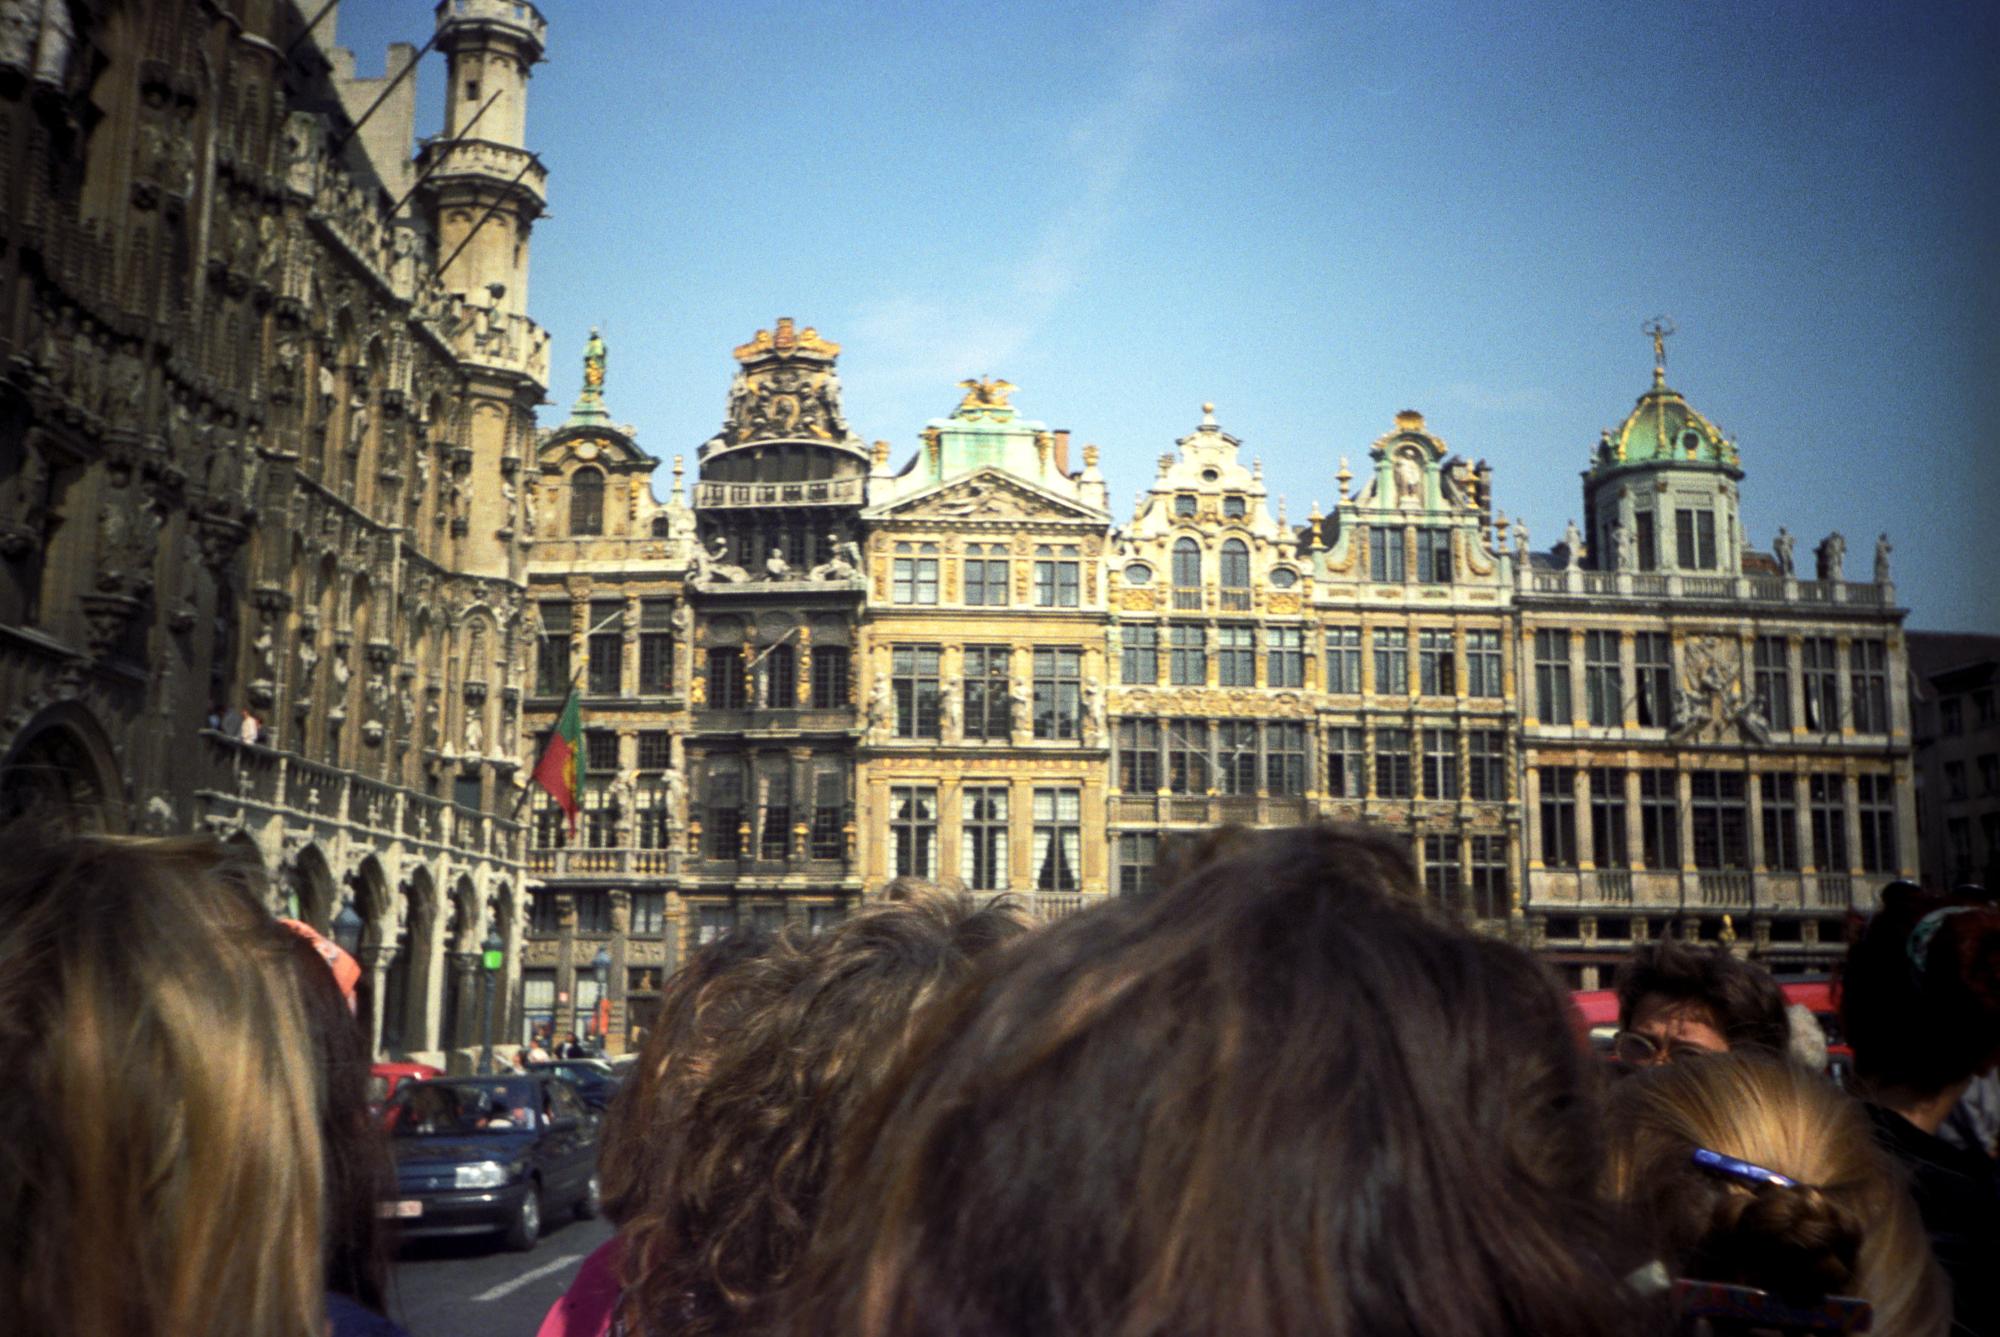 Benelux (Ana) - Brussels #3